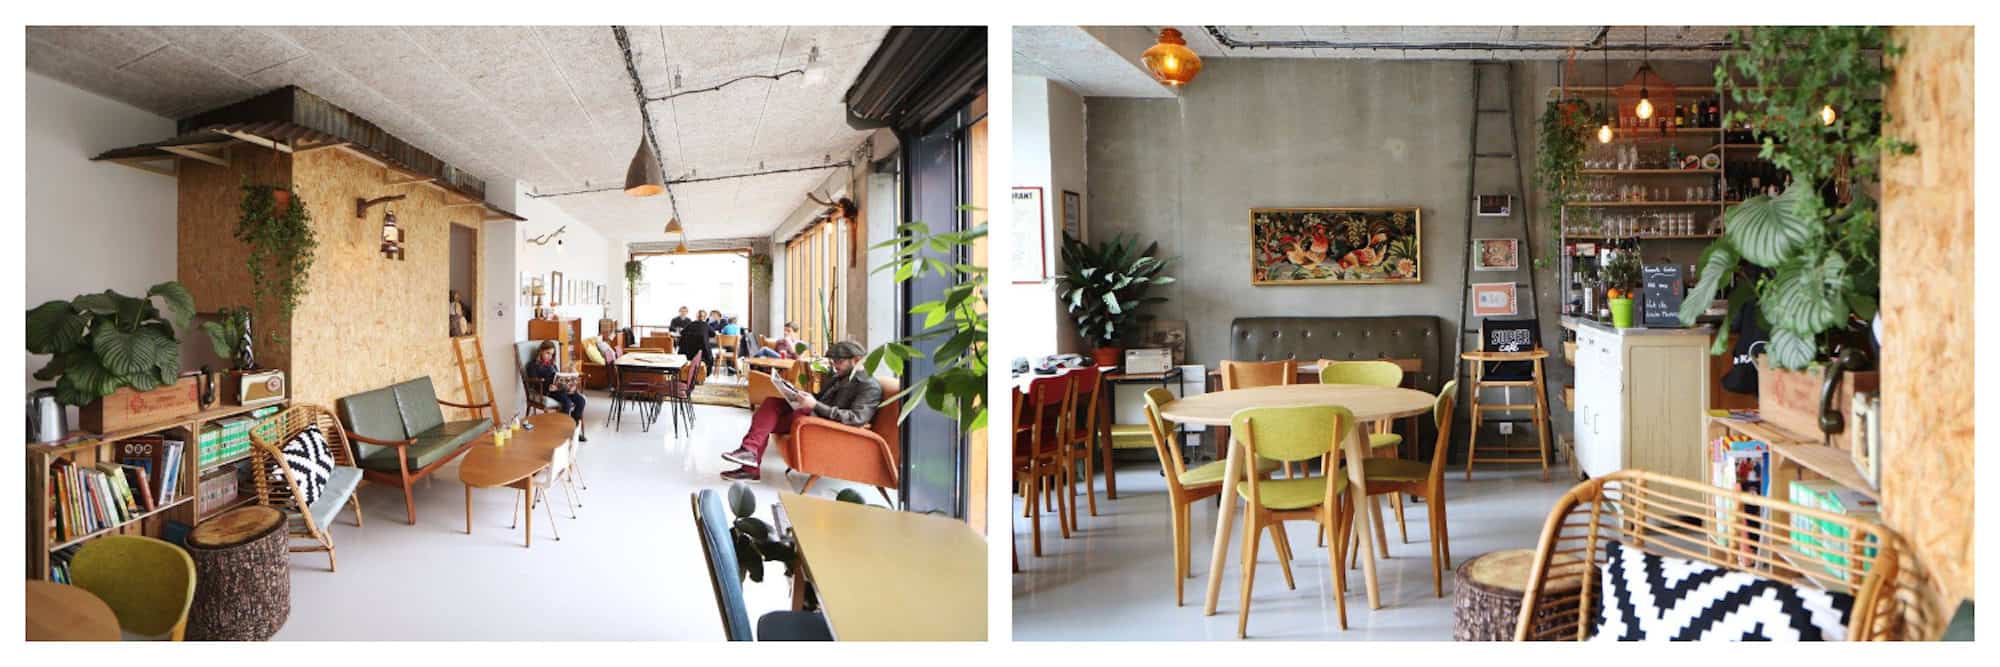 Inside Paris kid-friendly coffee shop, Super Café in the 20th arrondissement (left) and its Scandinavian-inspired decor (right).